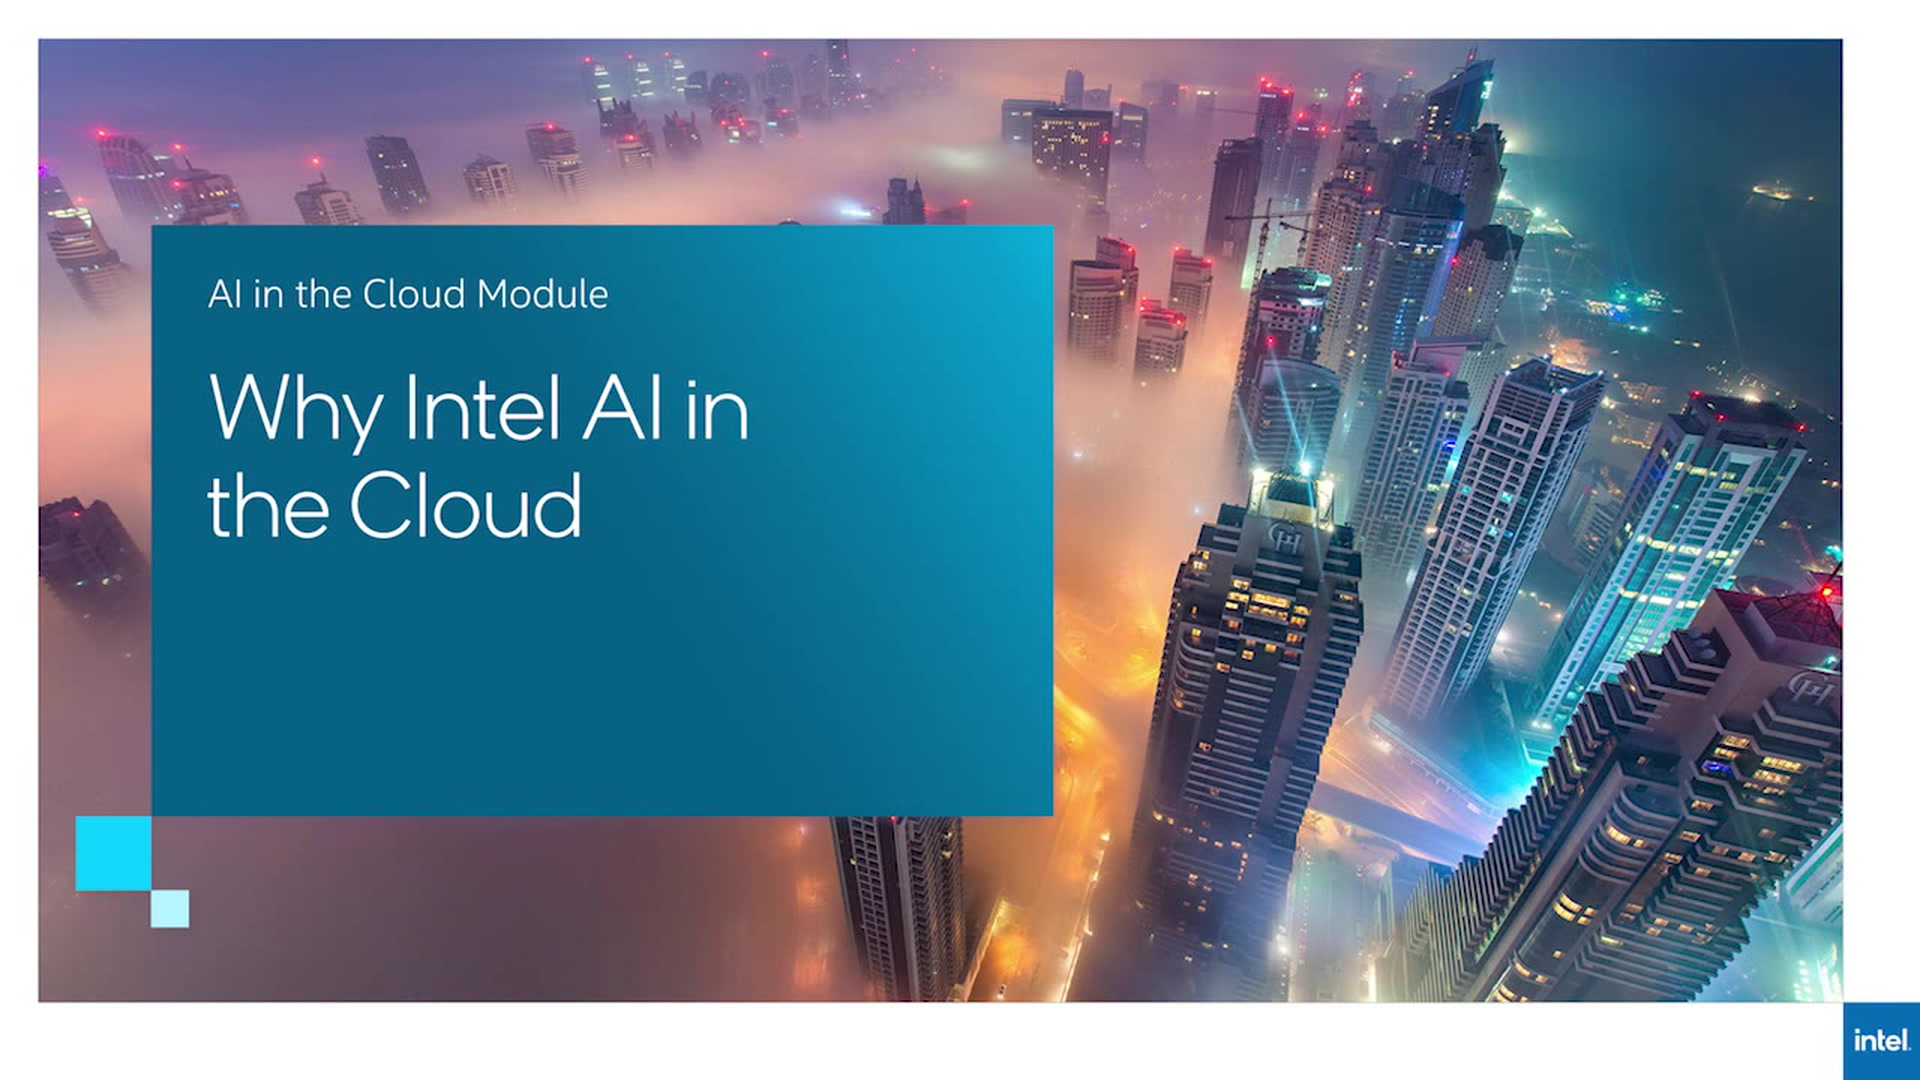 Why Intel AI in the Cloud